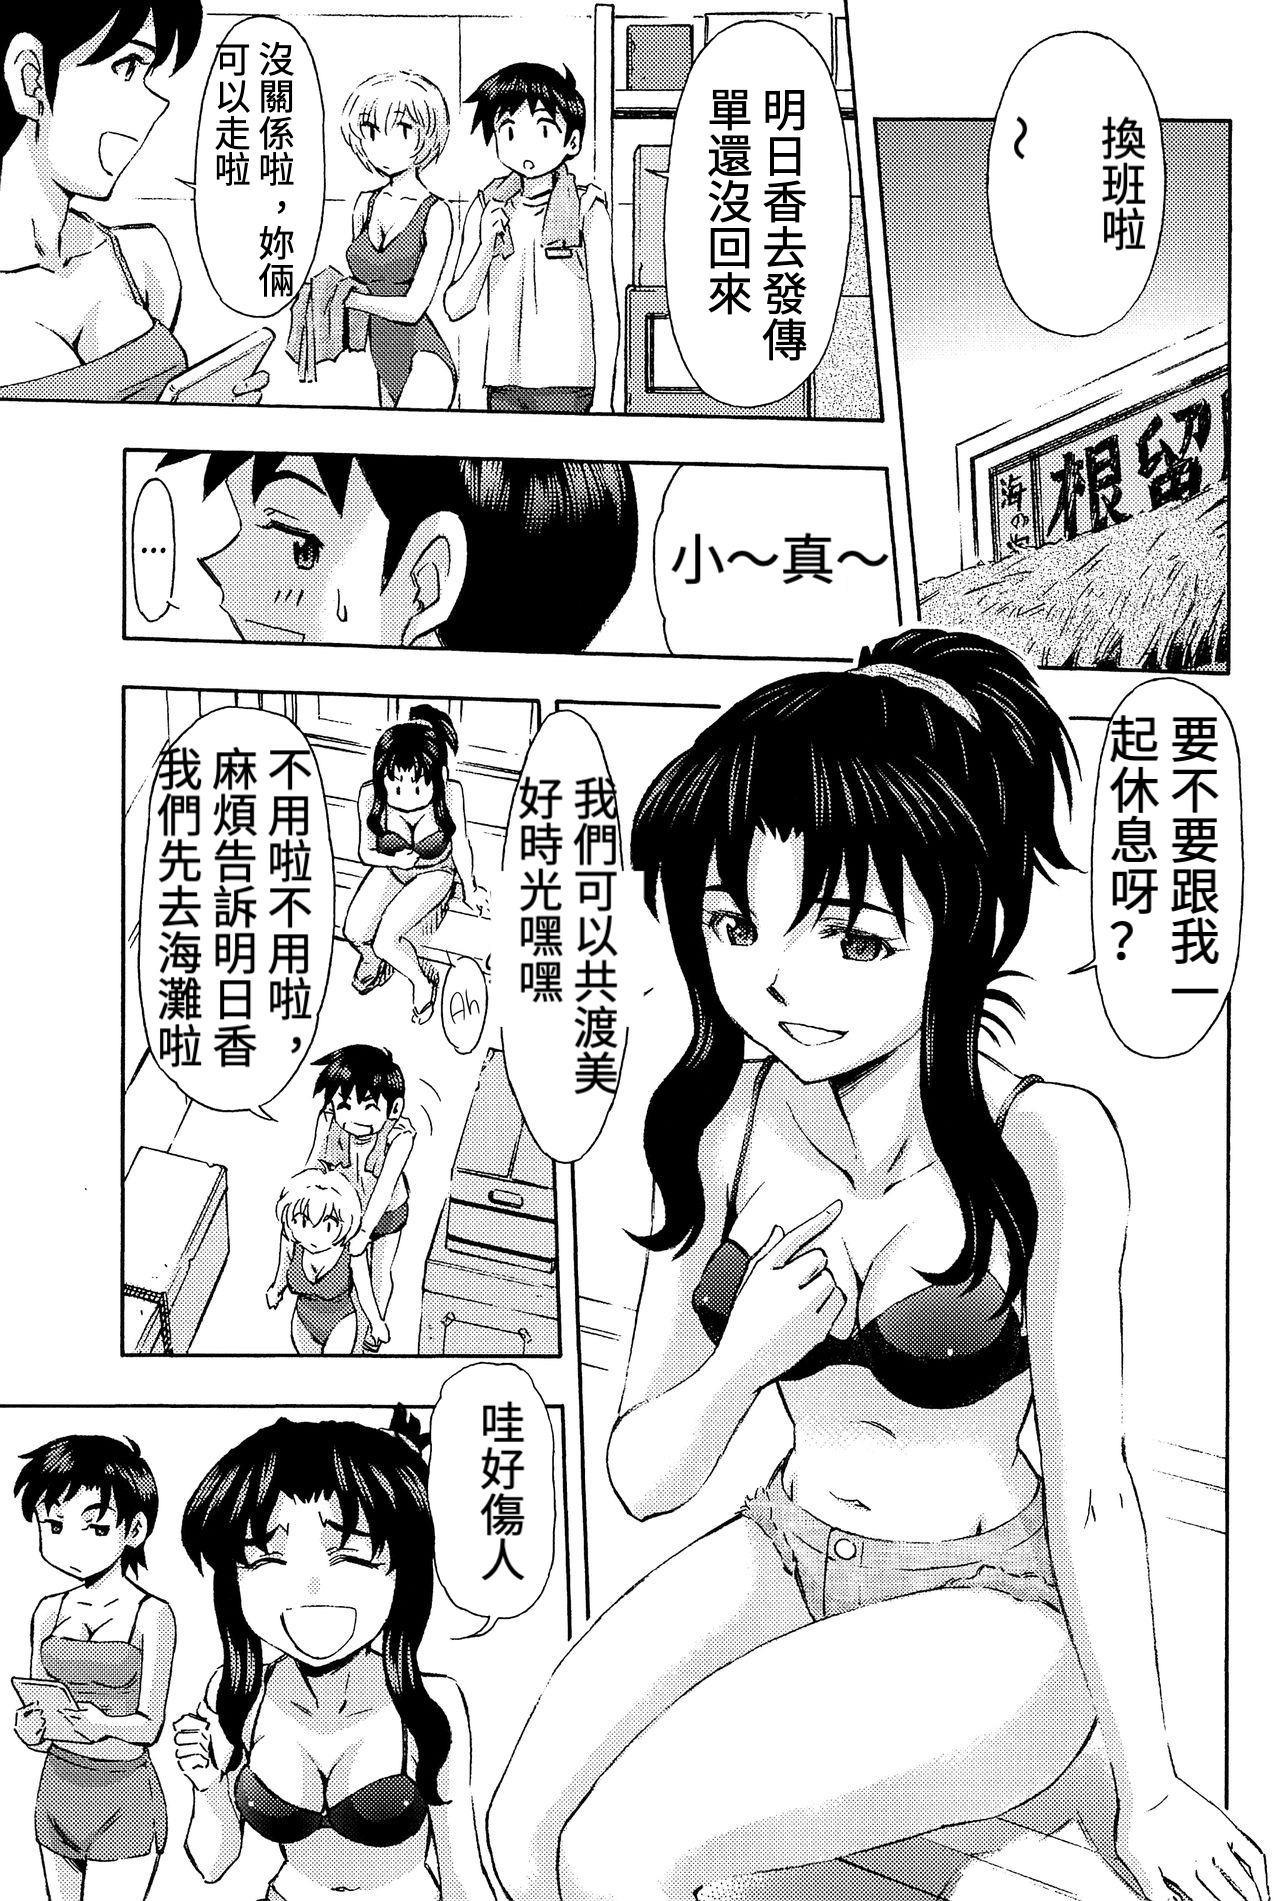 Couch 3-nin Musume to Umi no Ie - Neon genesis evangelion Butt - Page 6